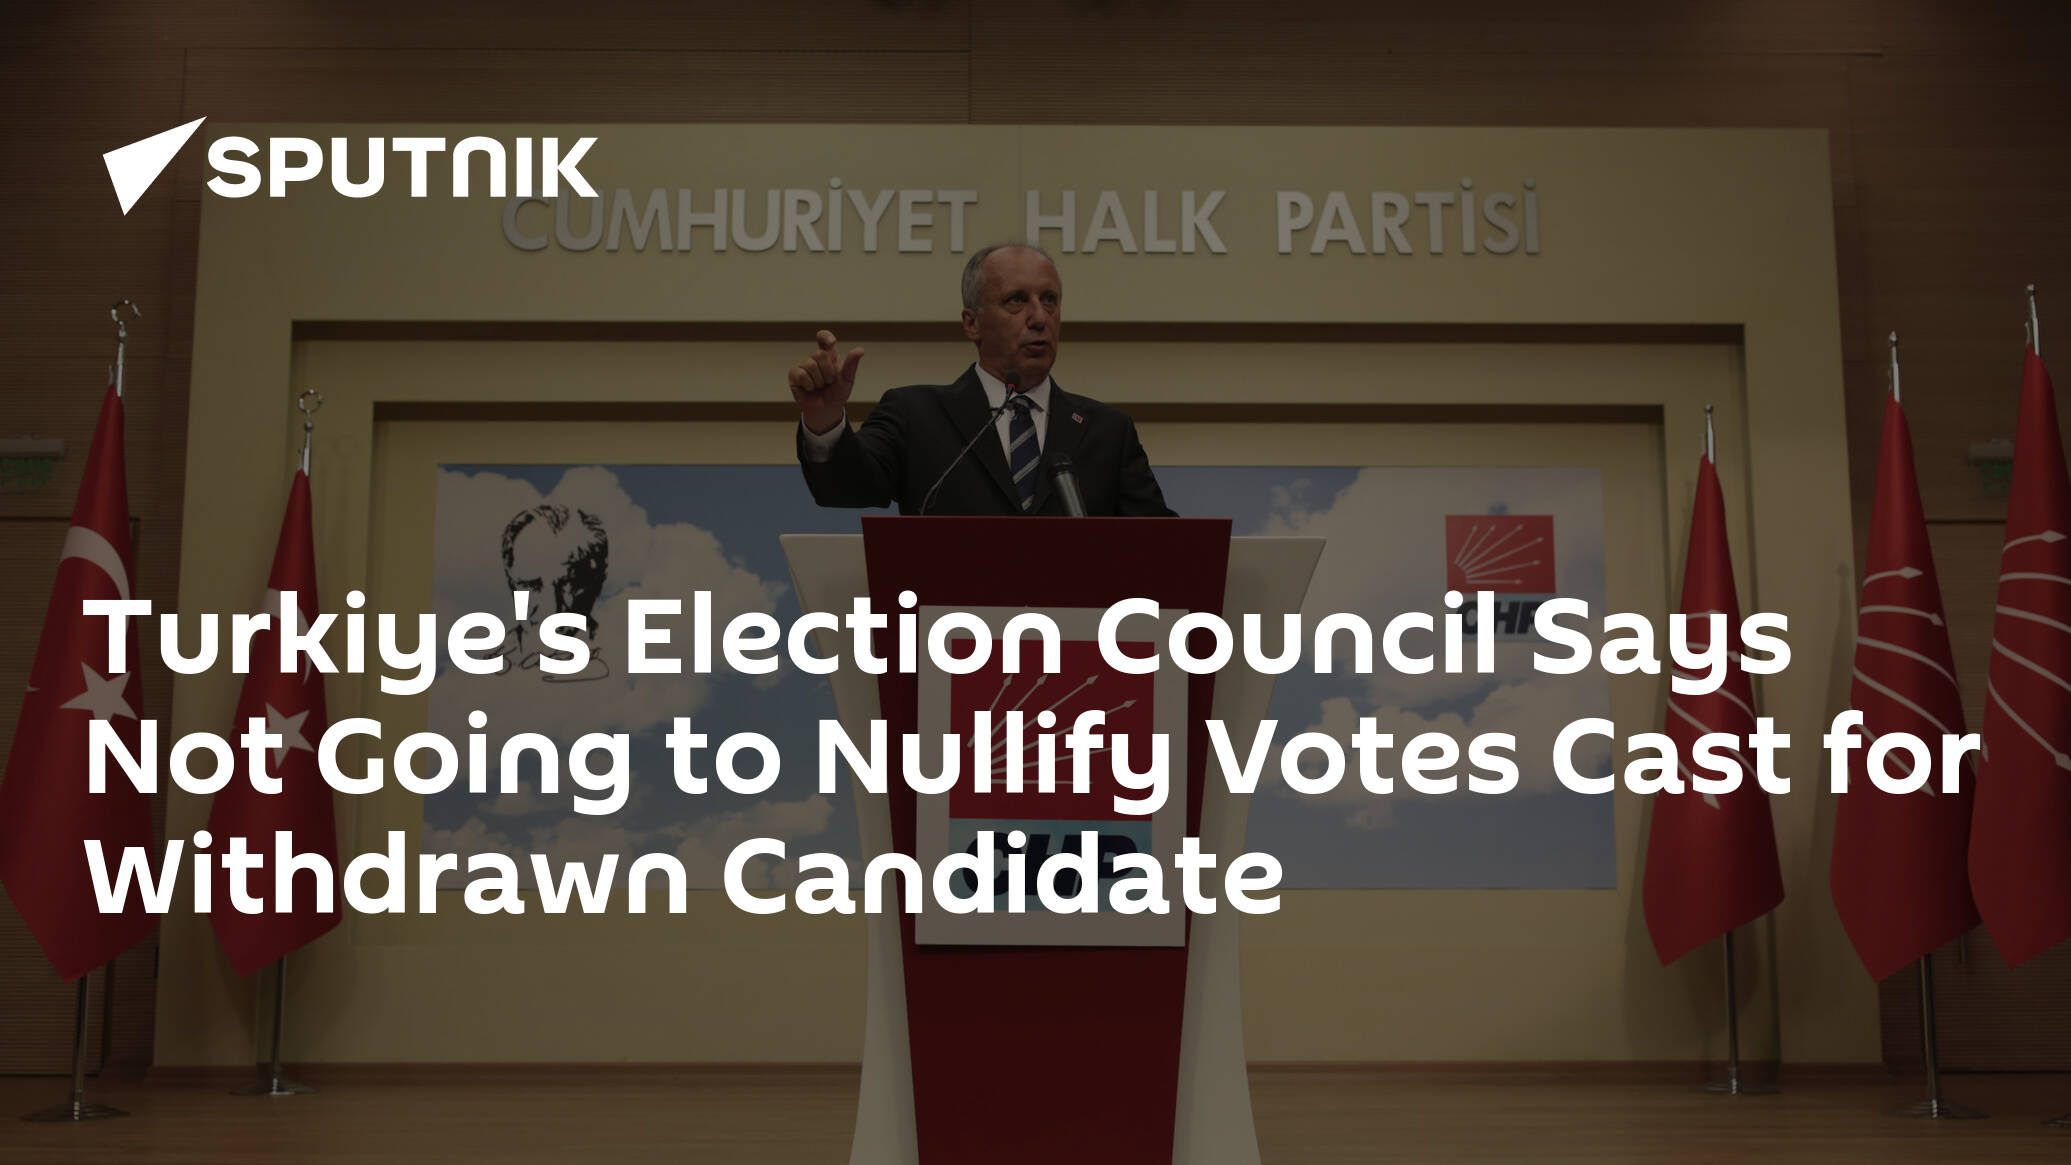 Turkiye's Election Council Says Not Going to Nullify Votes Cast for Withdrawn Candidate